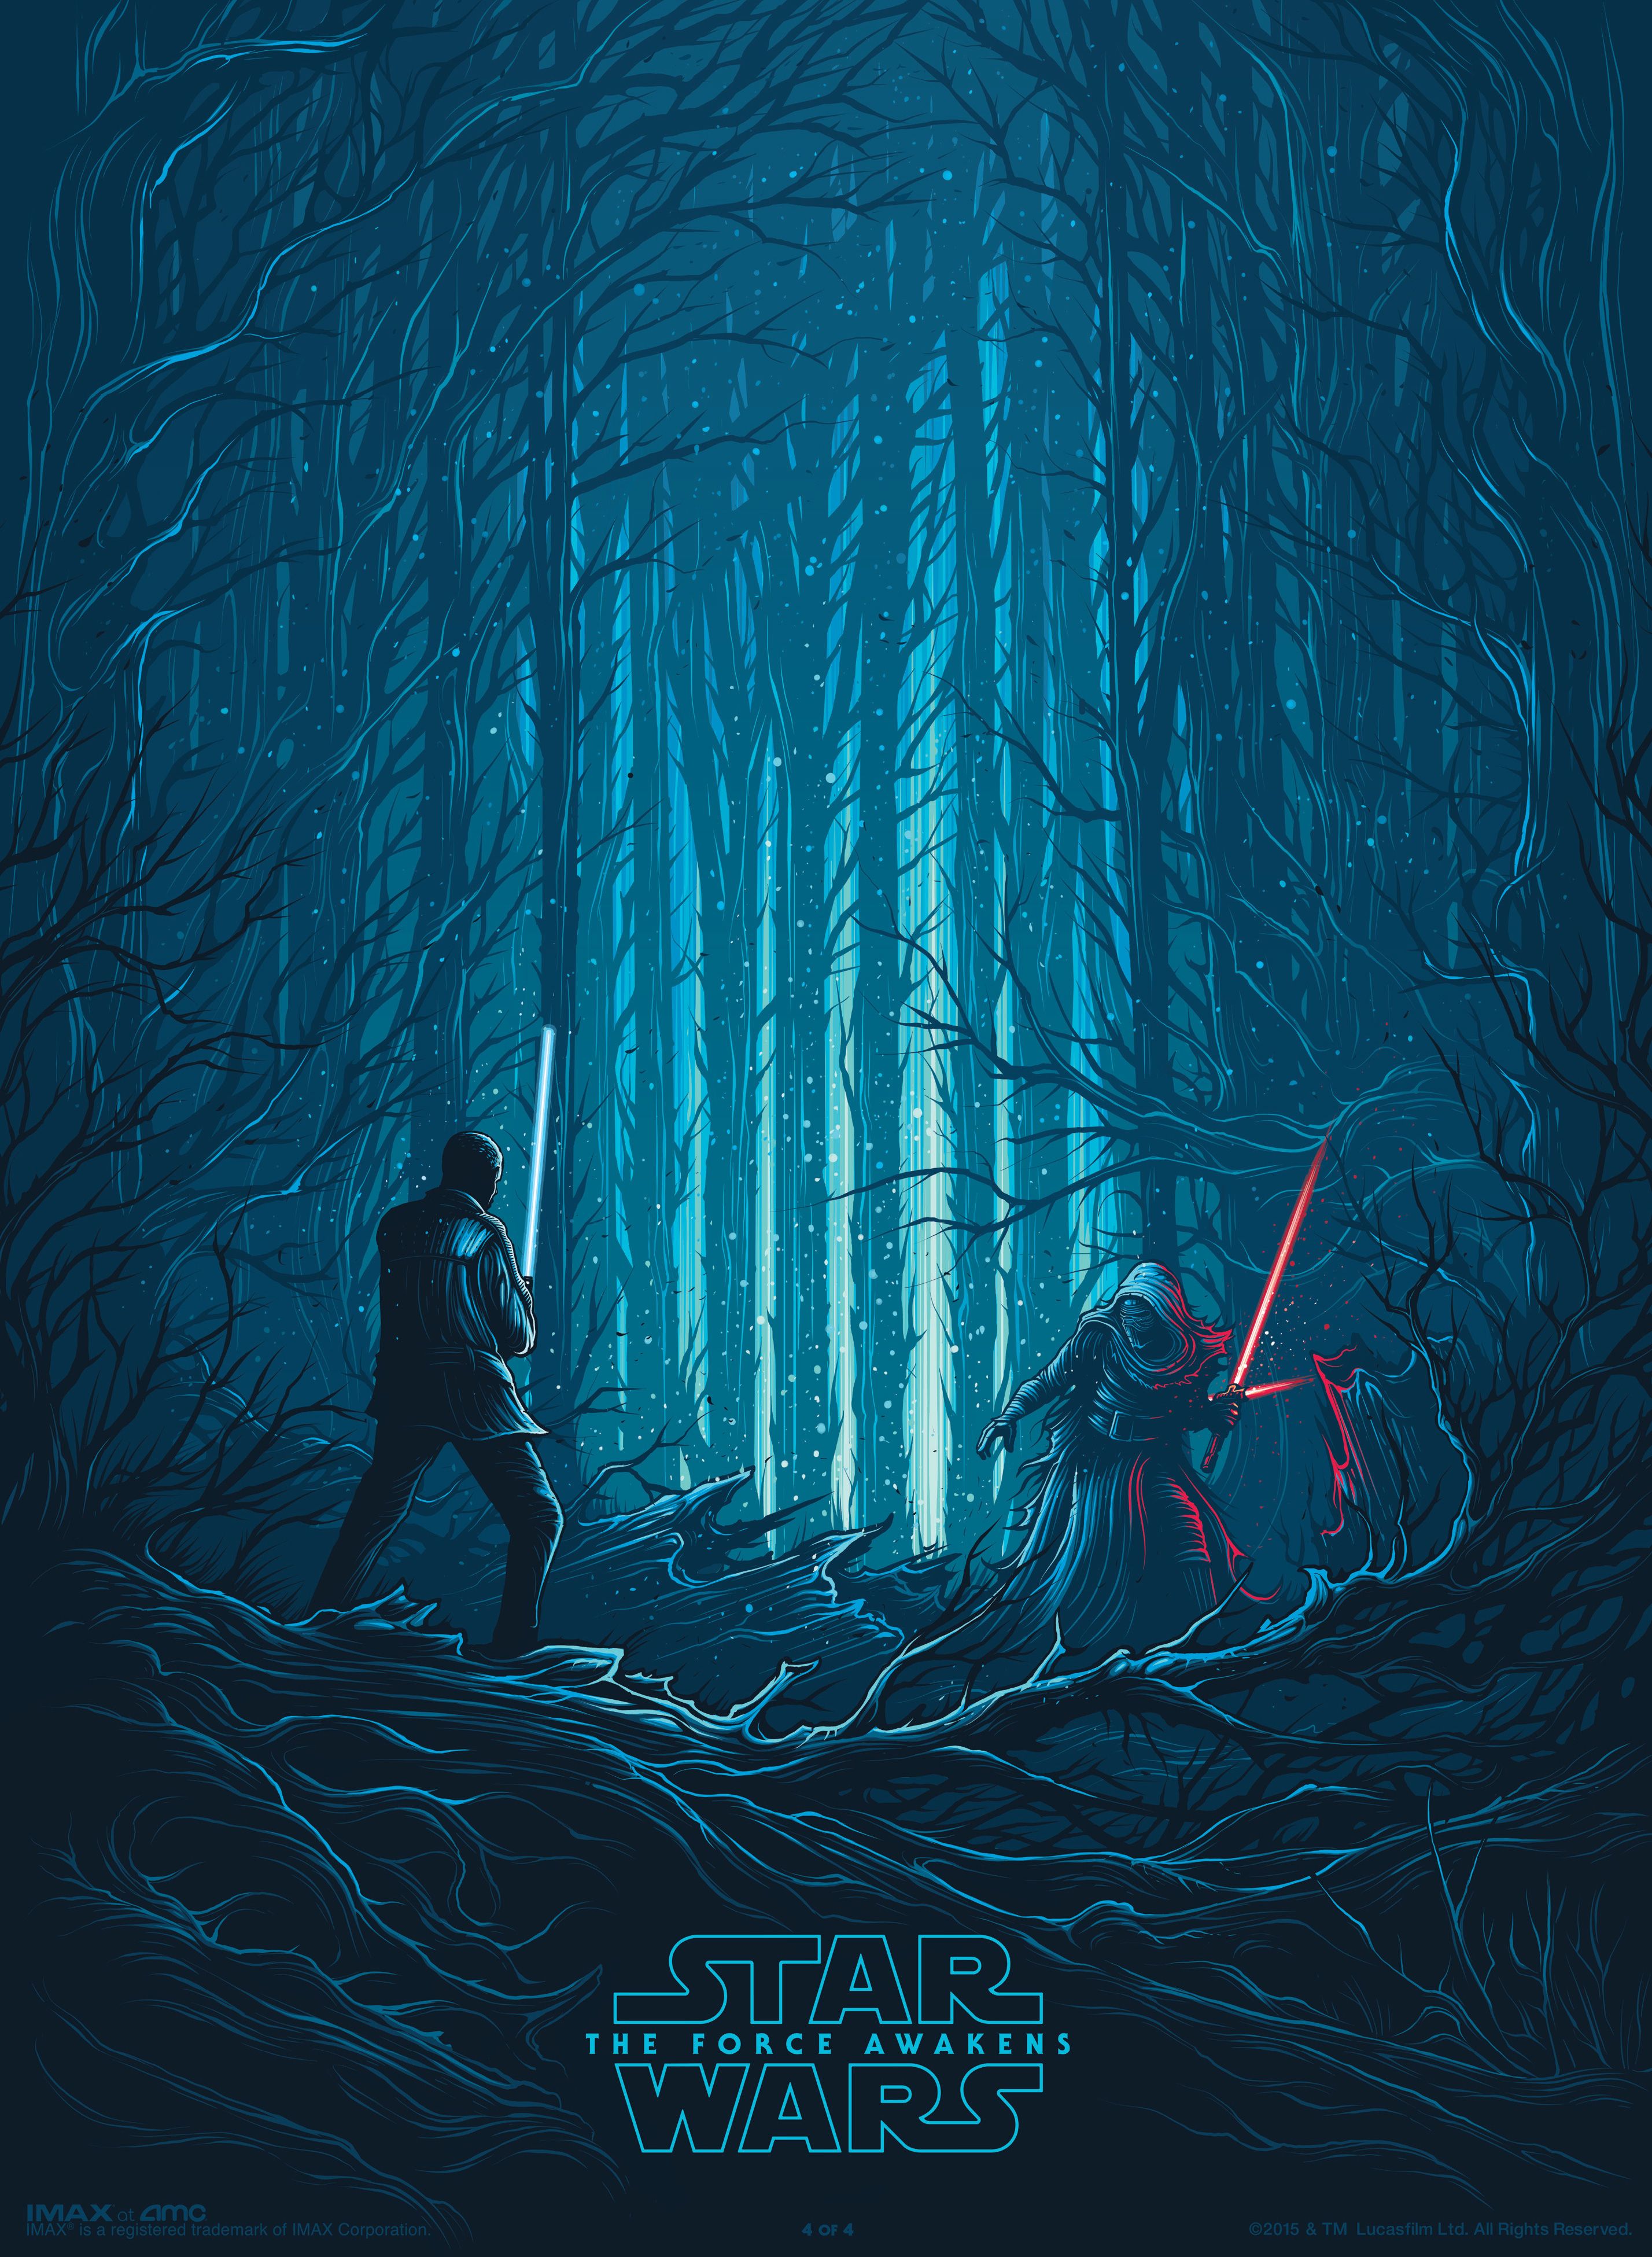 Star Wars: The Force Awakens” poster from IMAX